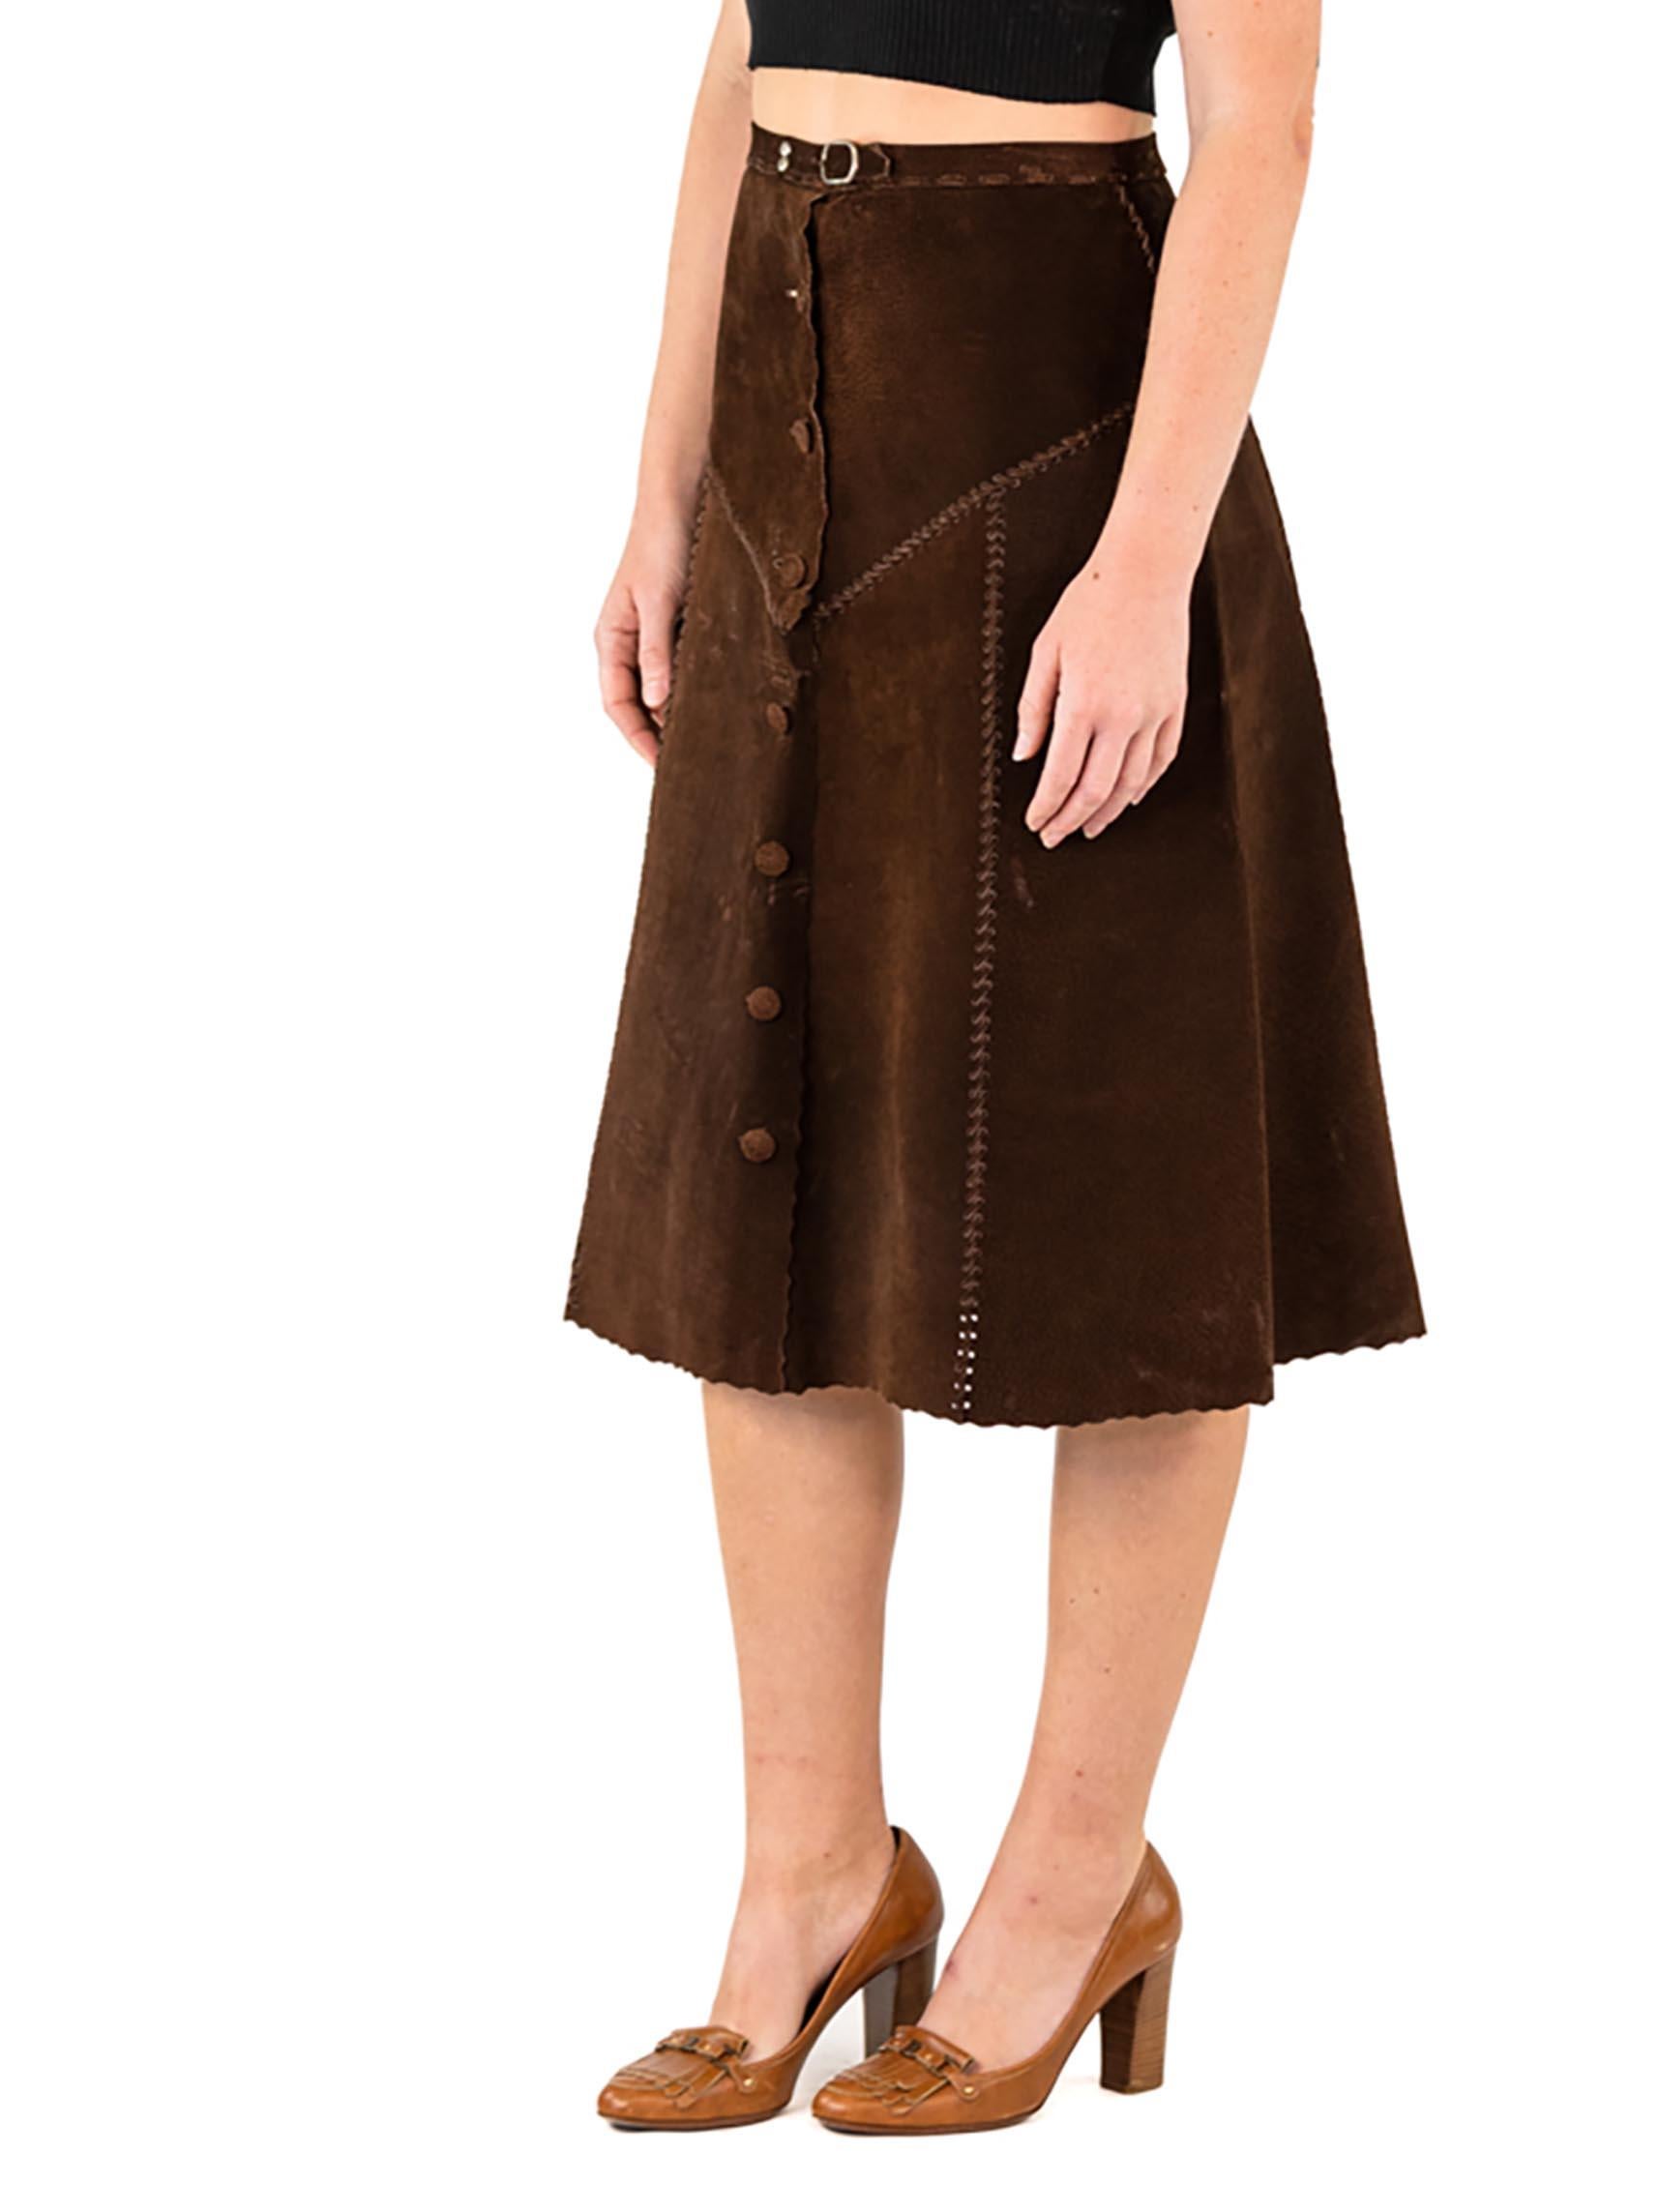 1970S Dark Chocolate Brown Suede Skirt With Snaps 1